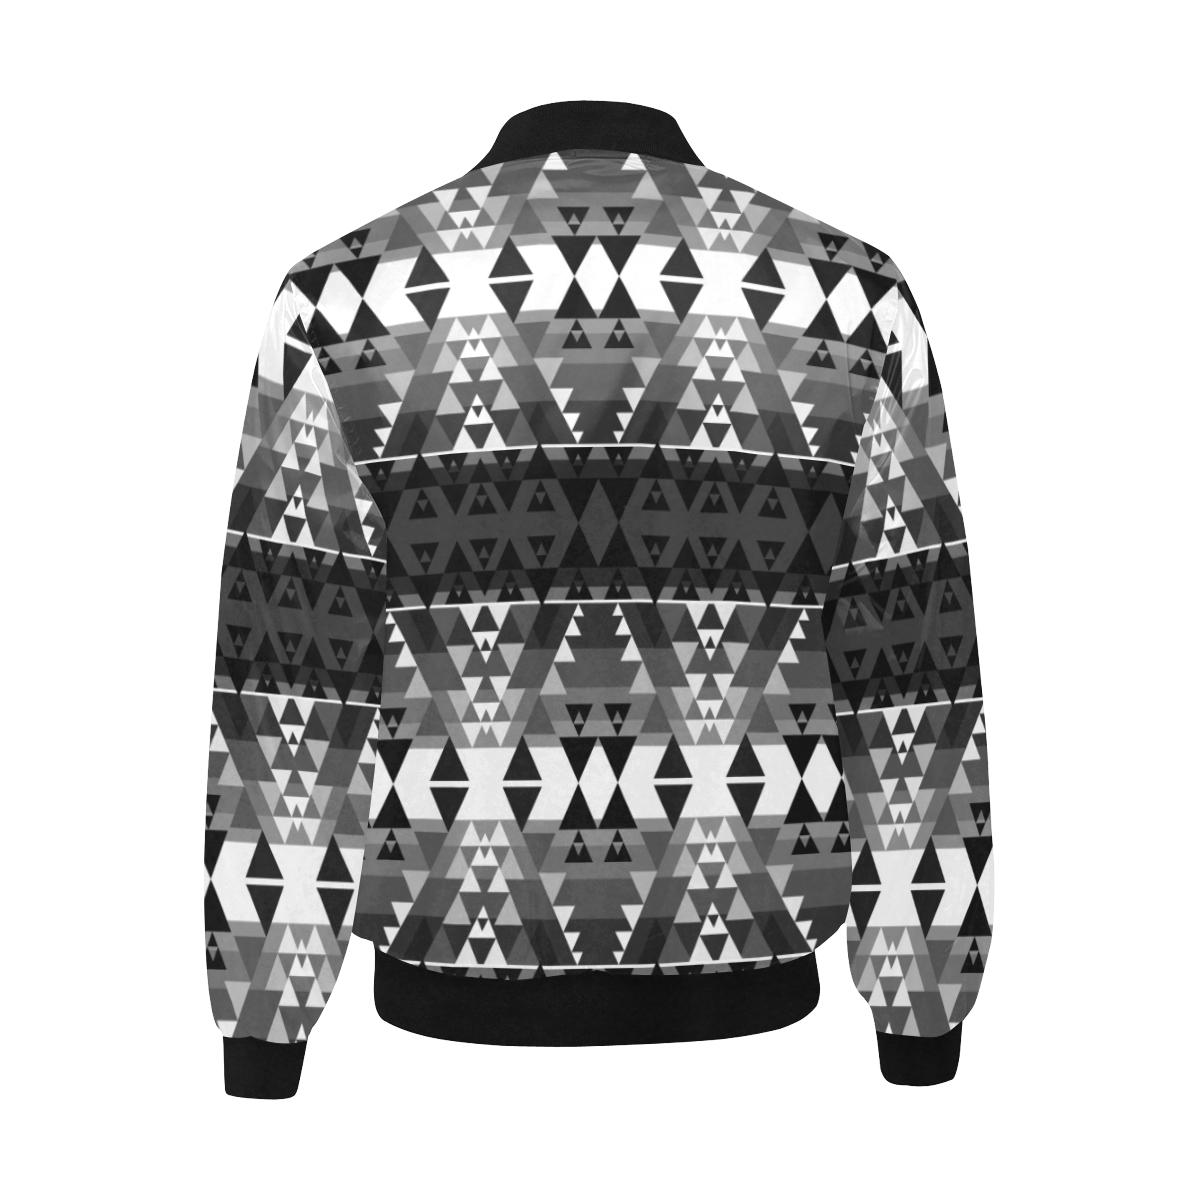 Writing on Stone Black and White Unisex Heavy Bomber Jacket with Quilted Lining All Over Print Quilted Jacket for Men (H33) e-joyer 